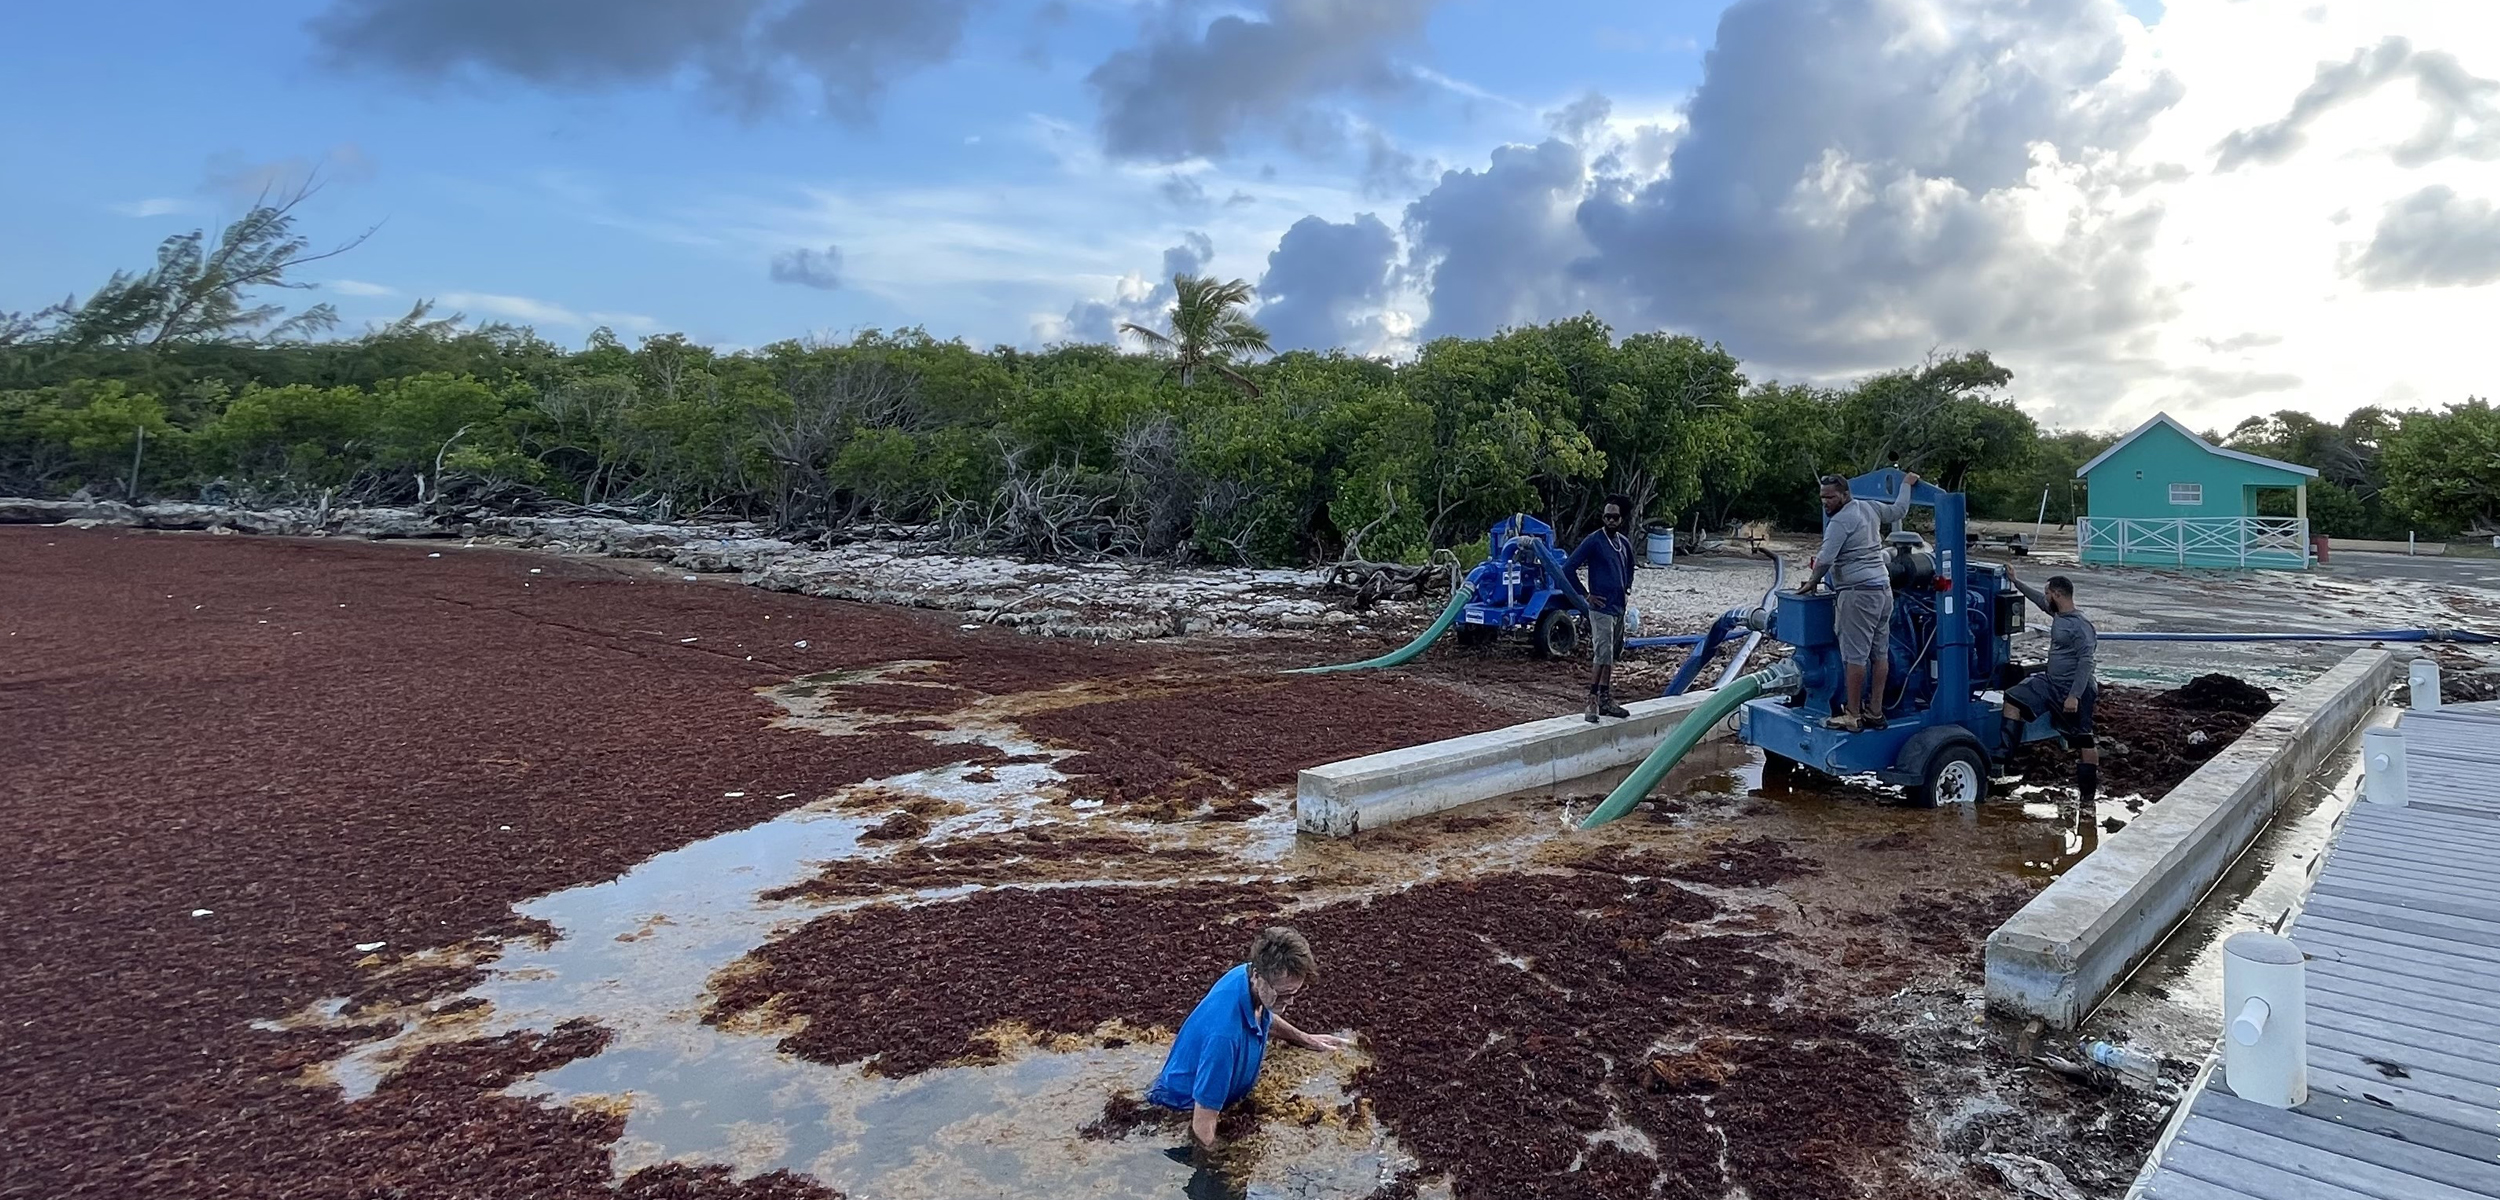 An aerial shot of red sargassum seaweed clogging up murky waters. A person dressed in blue wades in the weeds while two blue giant vaccuum machines stick green tubes in the water.